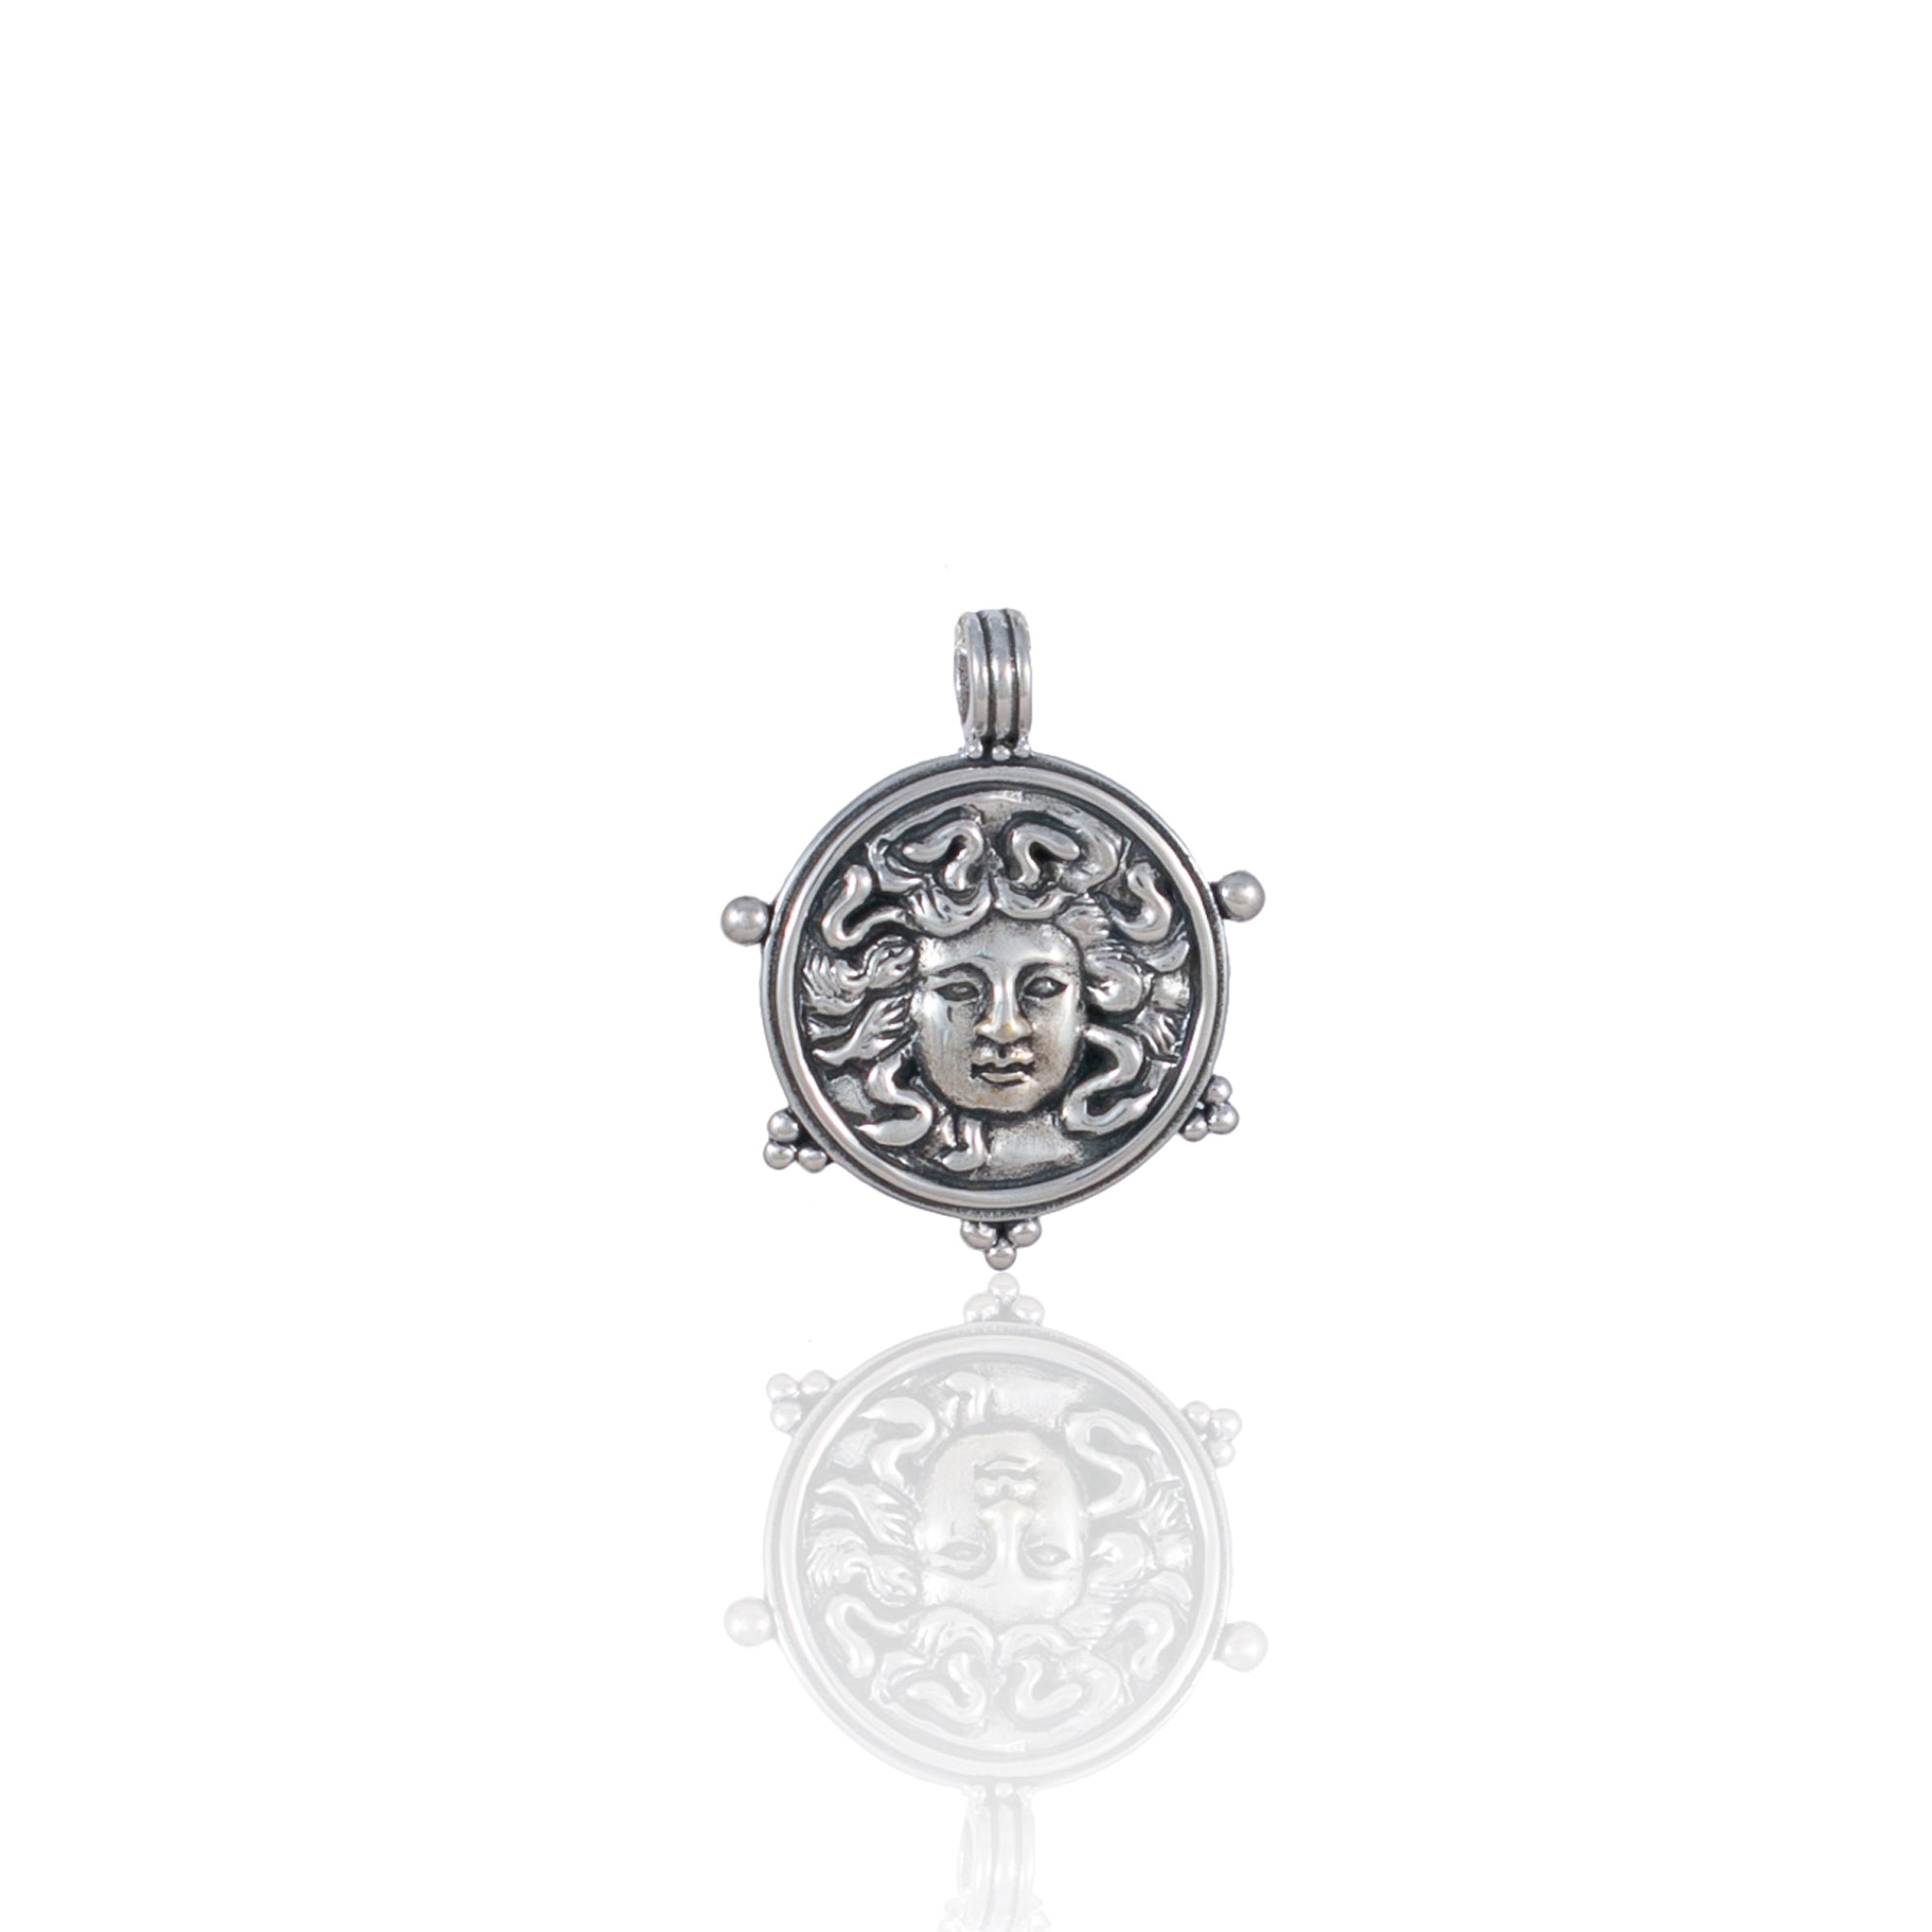 Medusa Pendant for Protection - CHARM ONLY - Silver